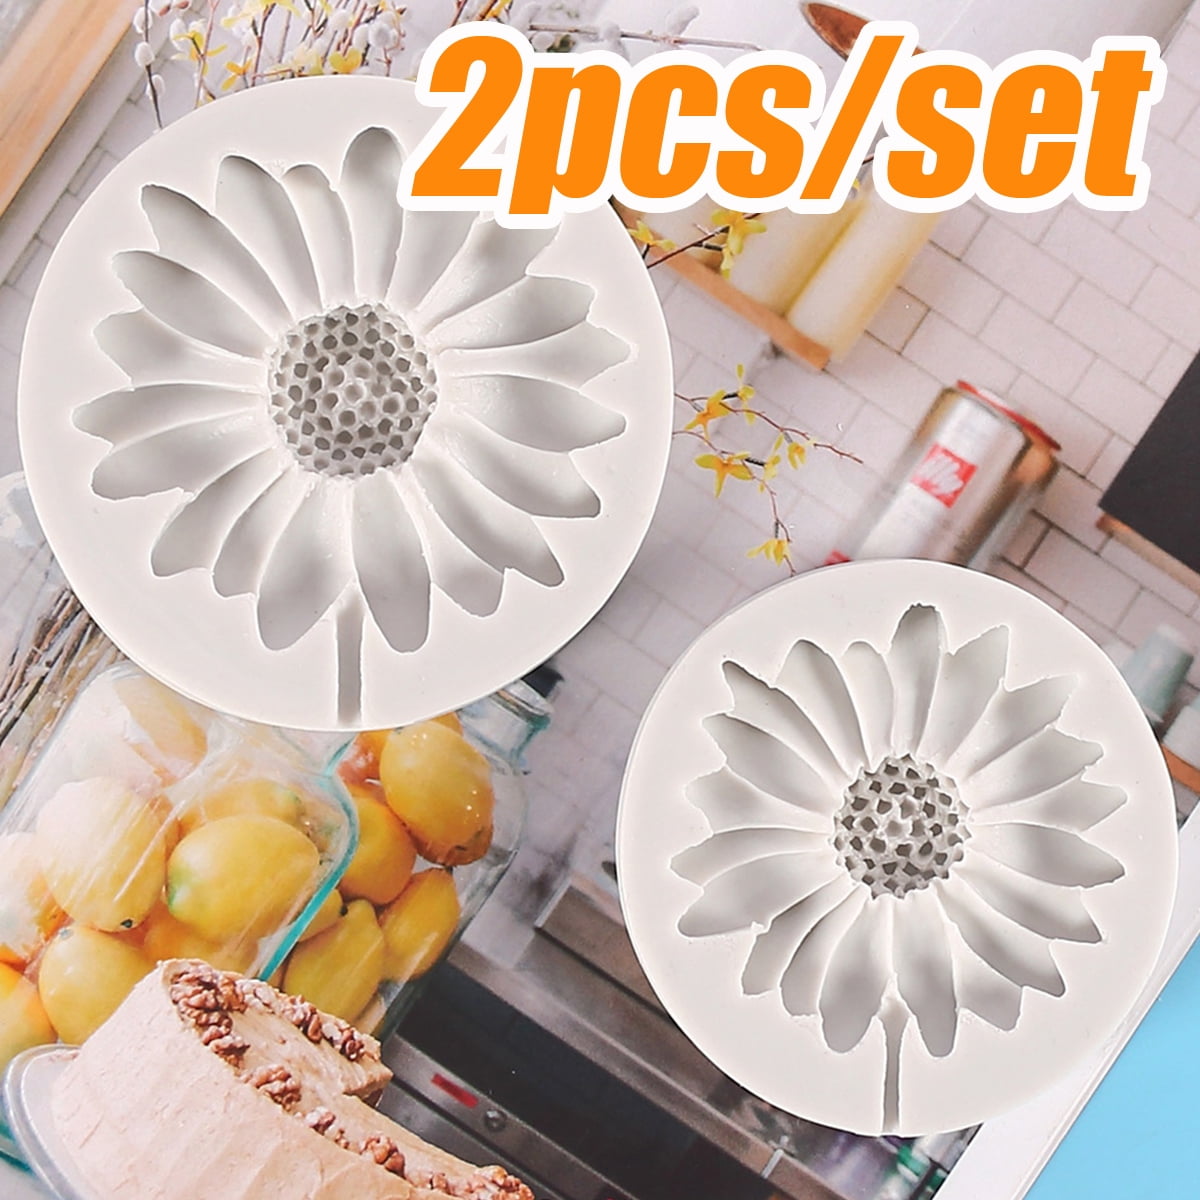 Flower Shape Silicone Round Lollipop Candy Molds Chocolate Cake